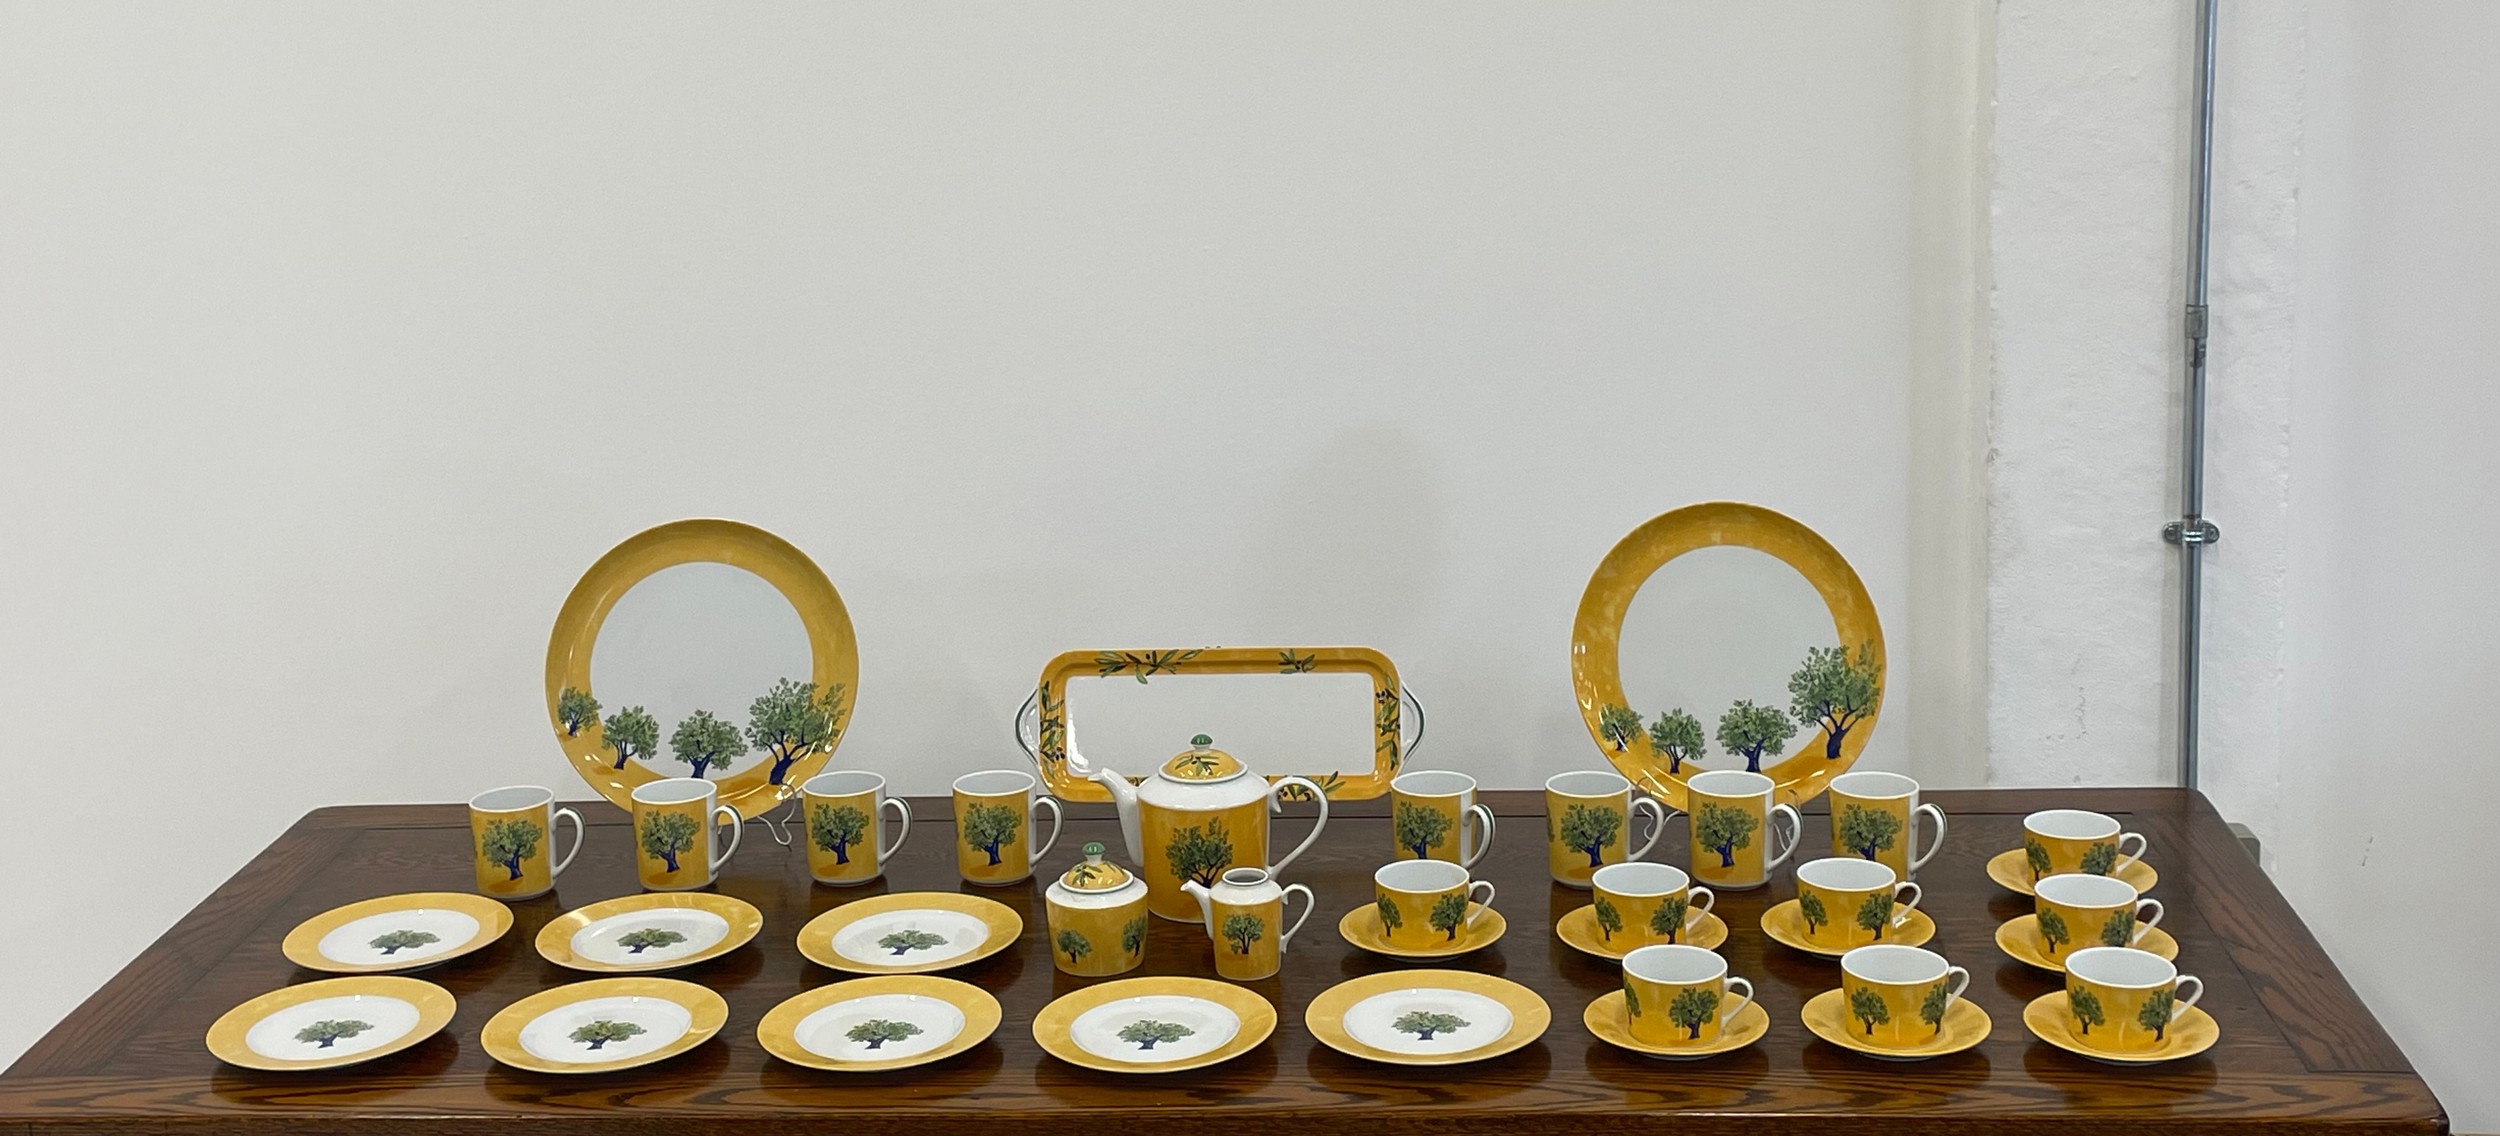 GUY DEGRENNE 'OULIVEIRO' EIGHT PLACE TEA SERVICE, including eight cups and saucers, eight mugs, - Image 10 of 10